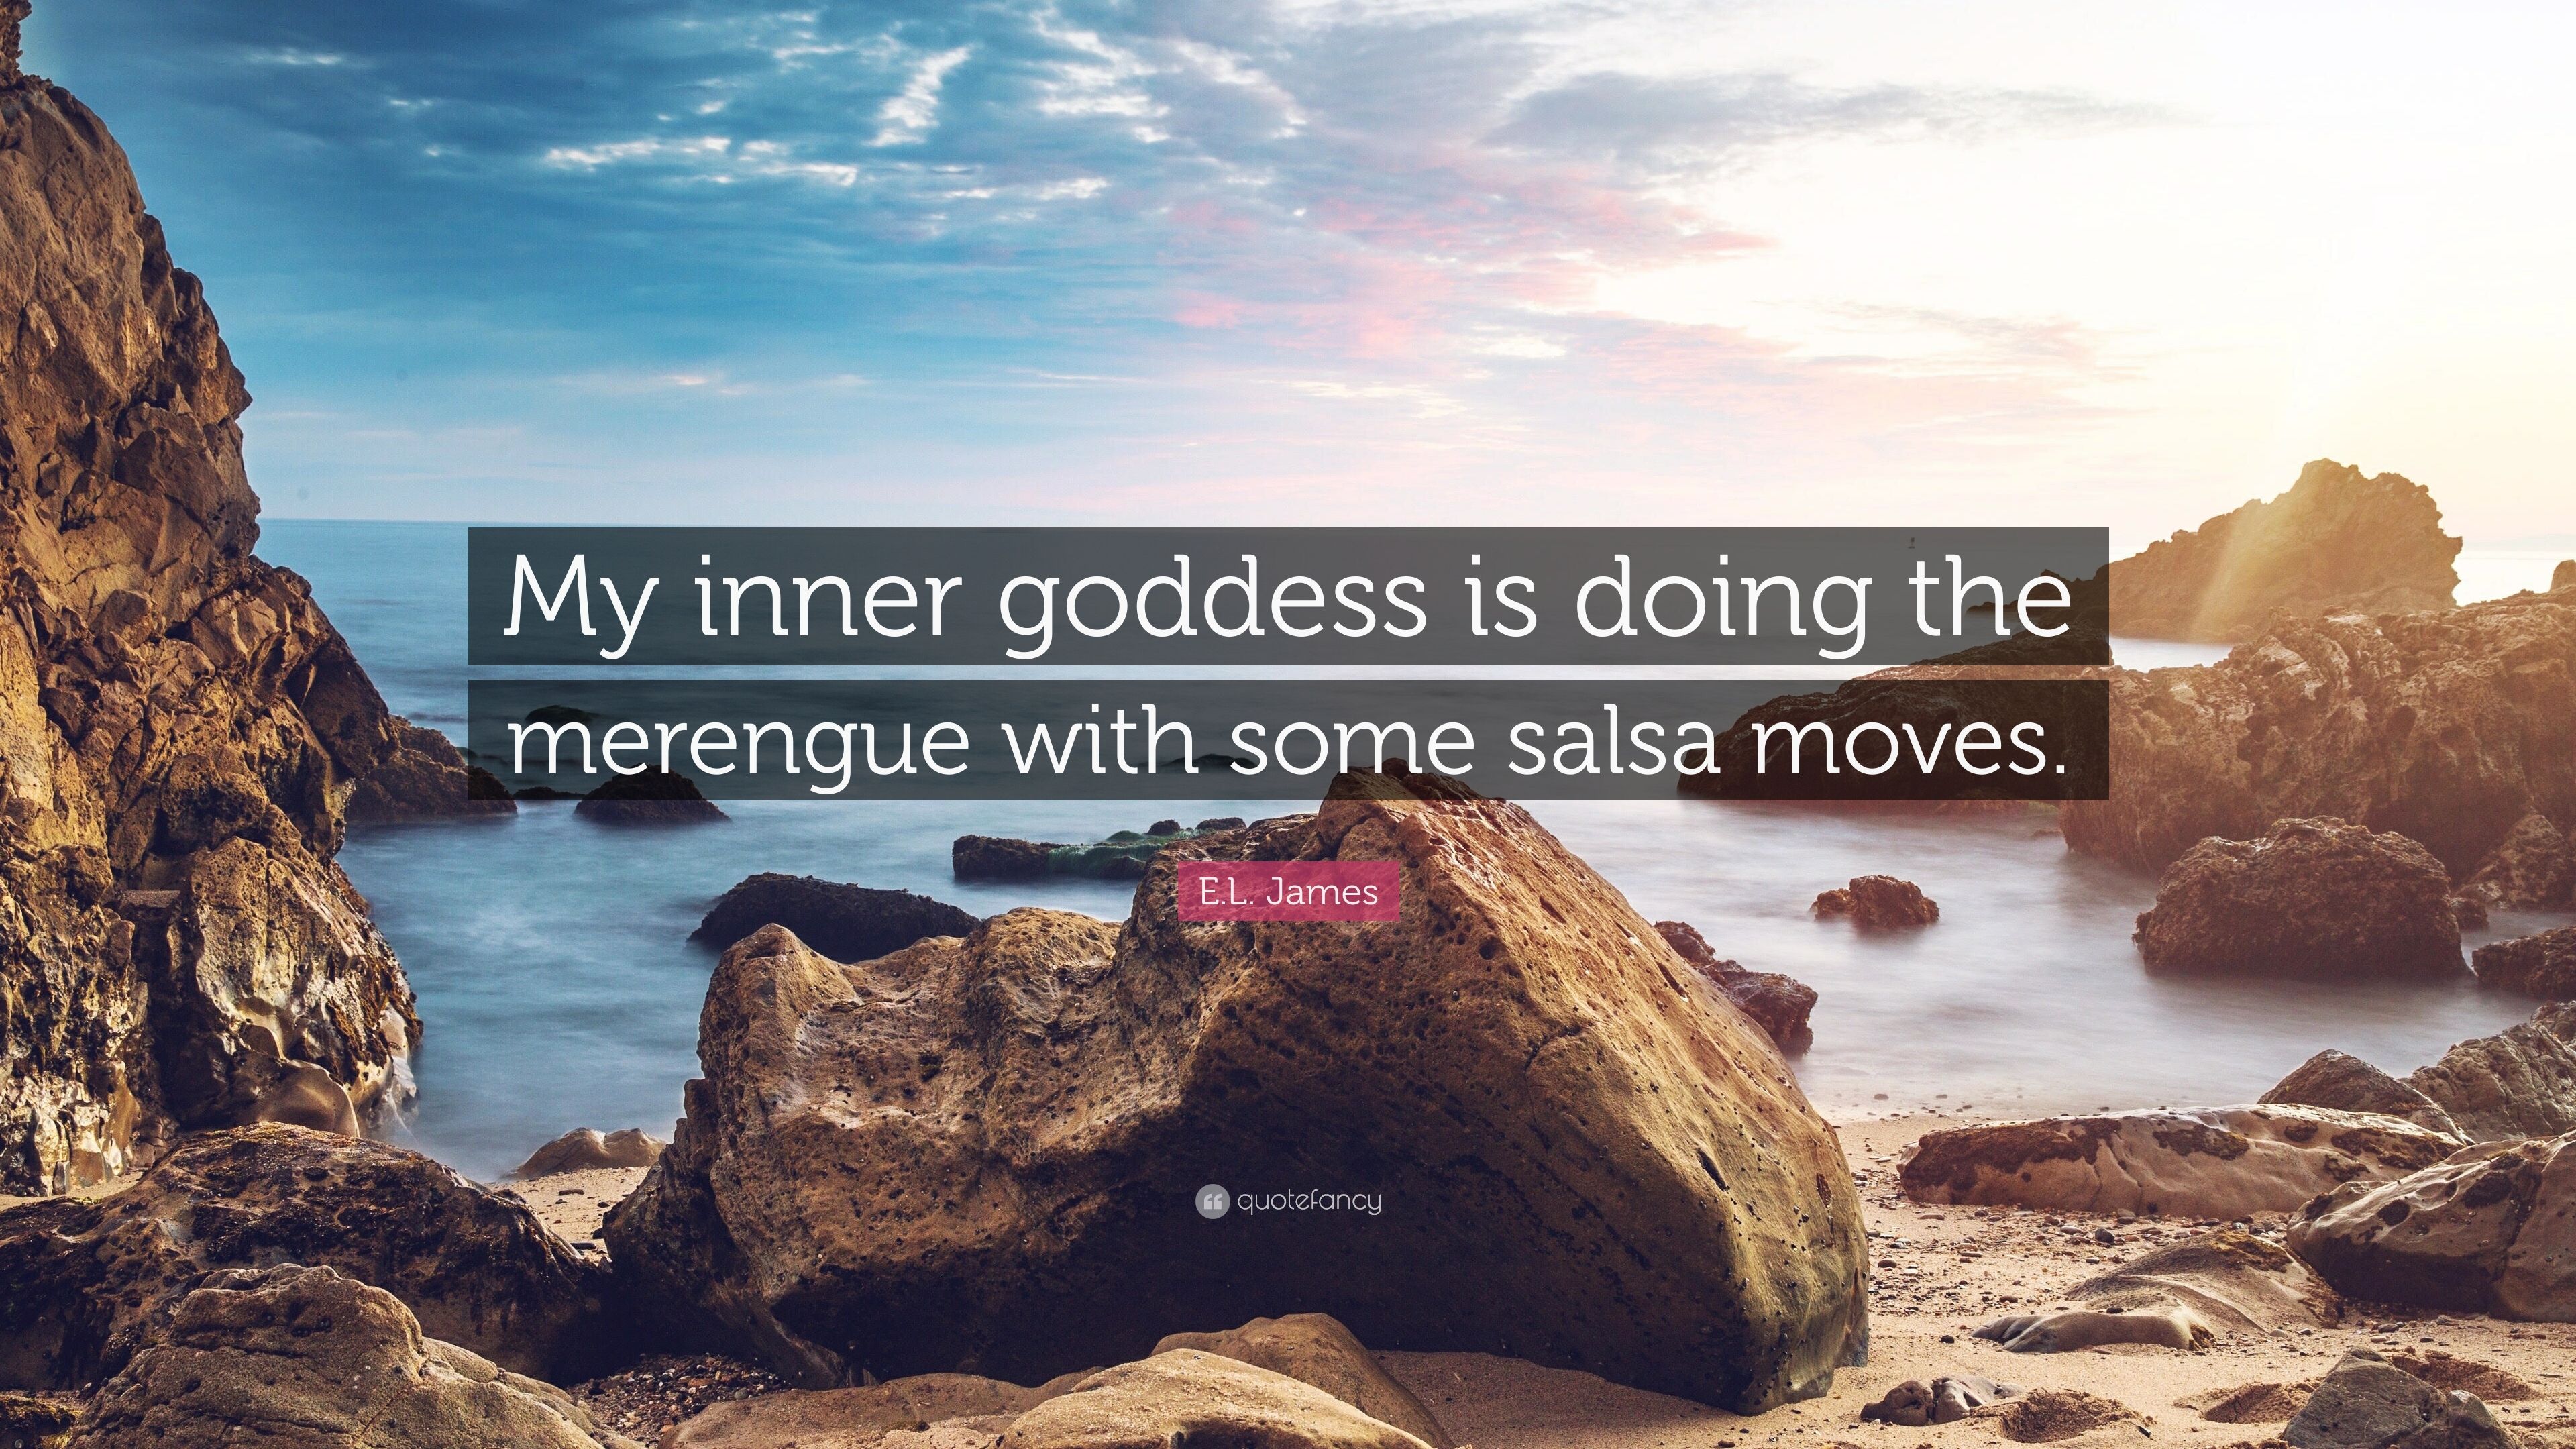 E.L. James Quote: “My inner goddess is doing the merengue with some